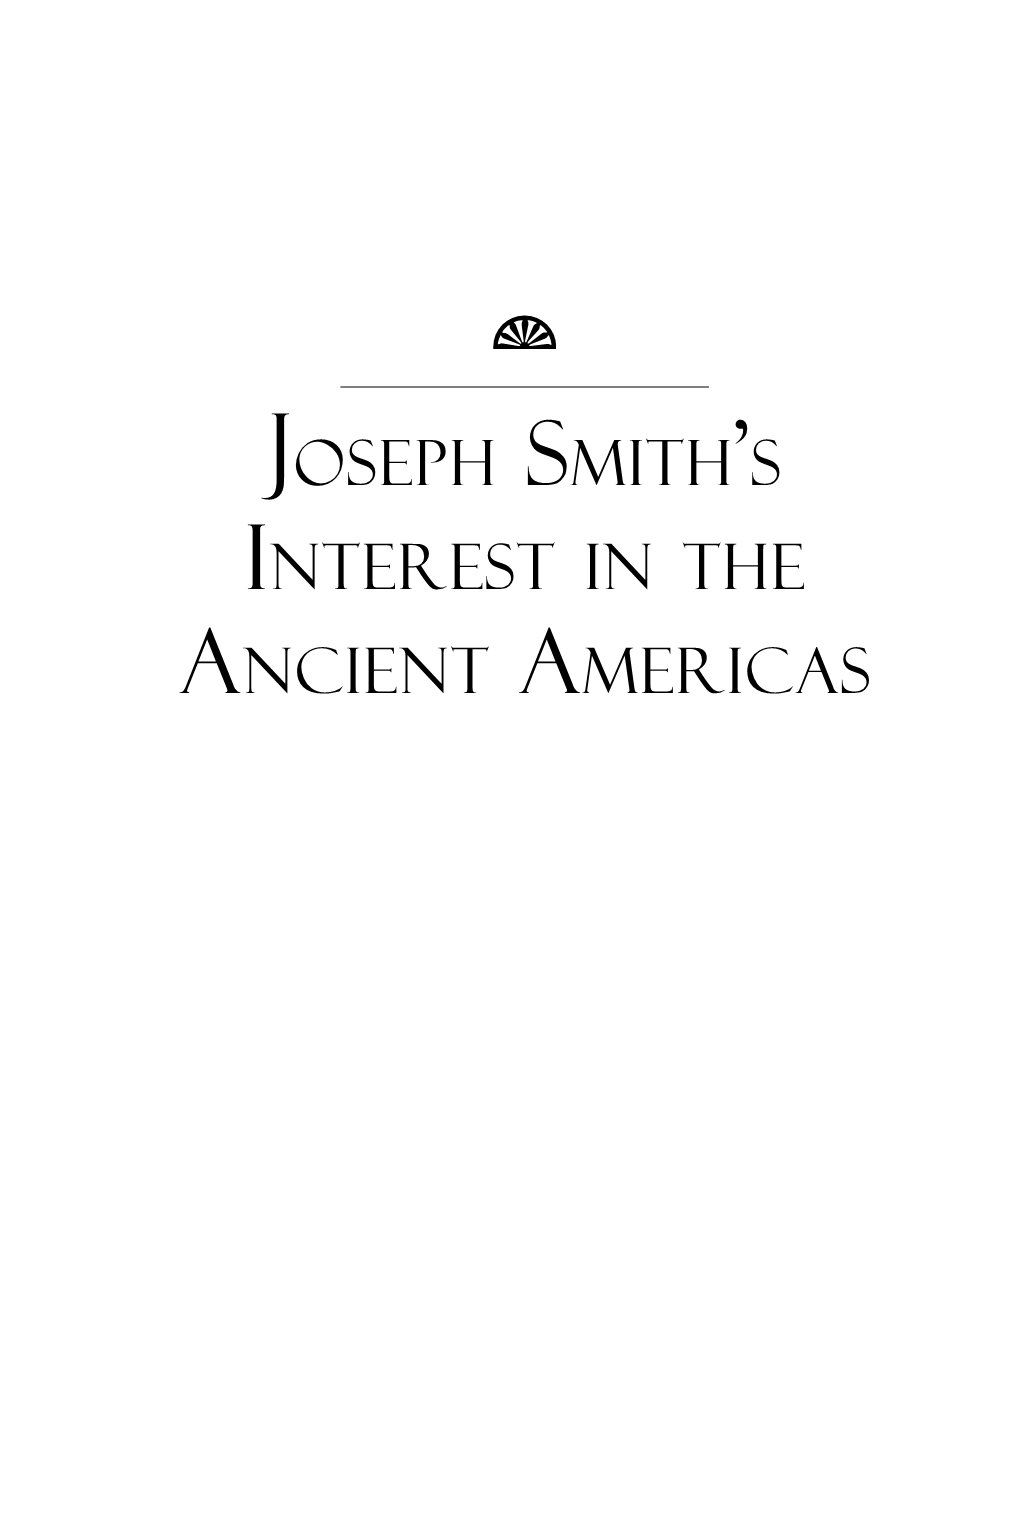 Joseph Smith's Interest in the Ancient Americas